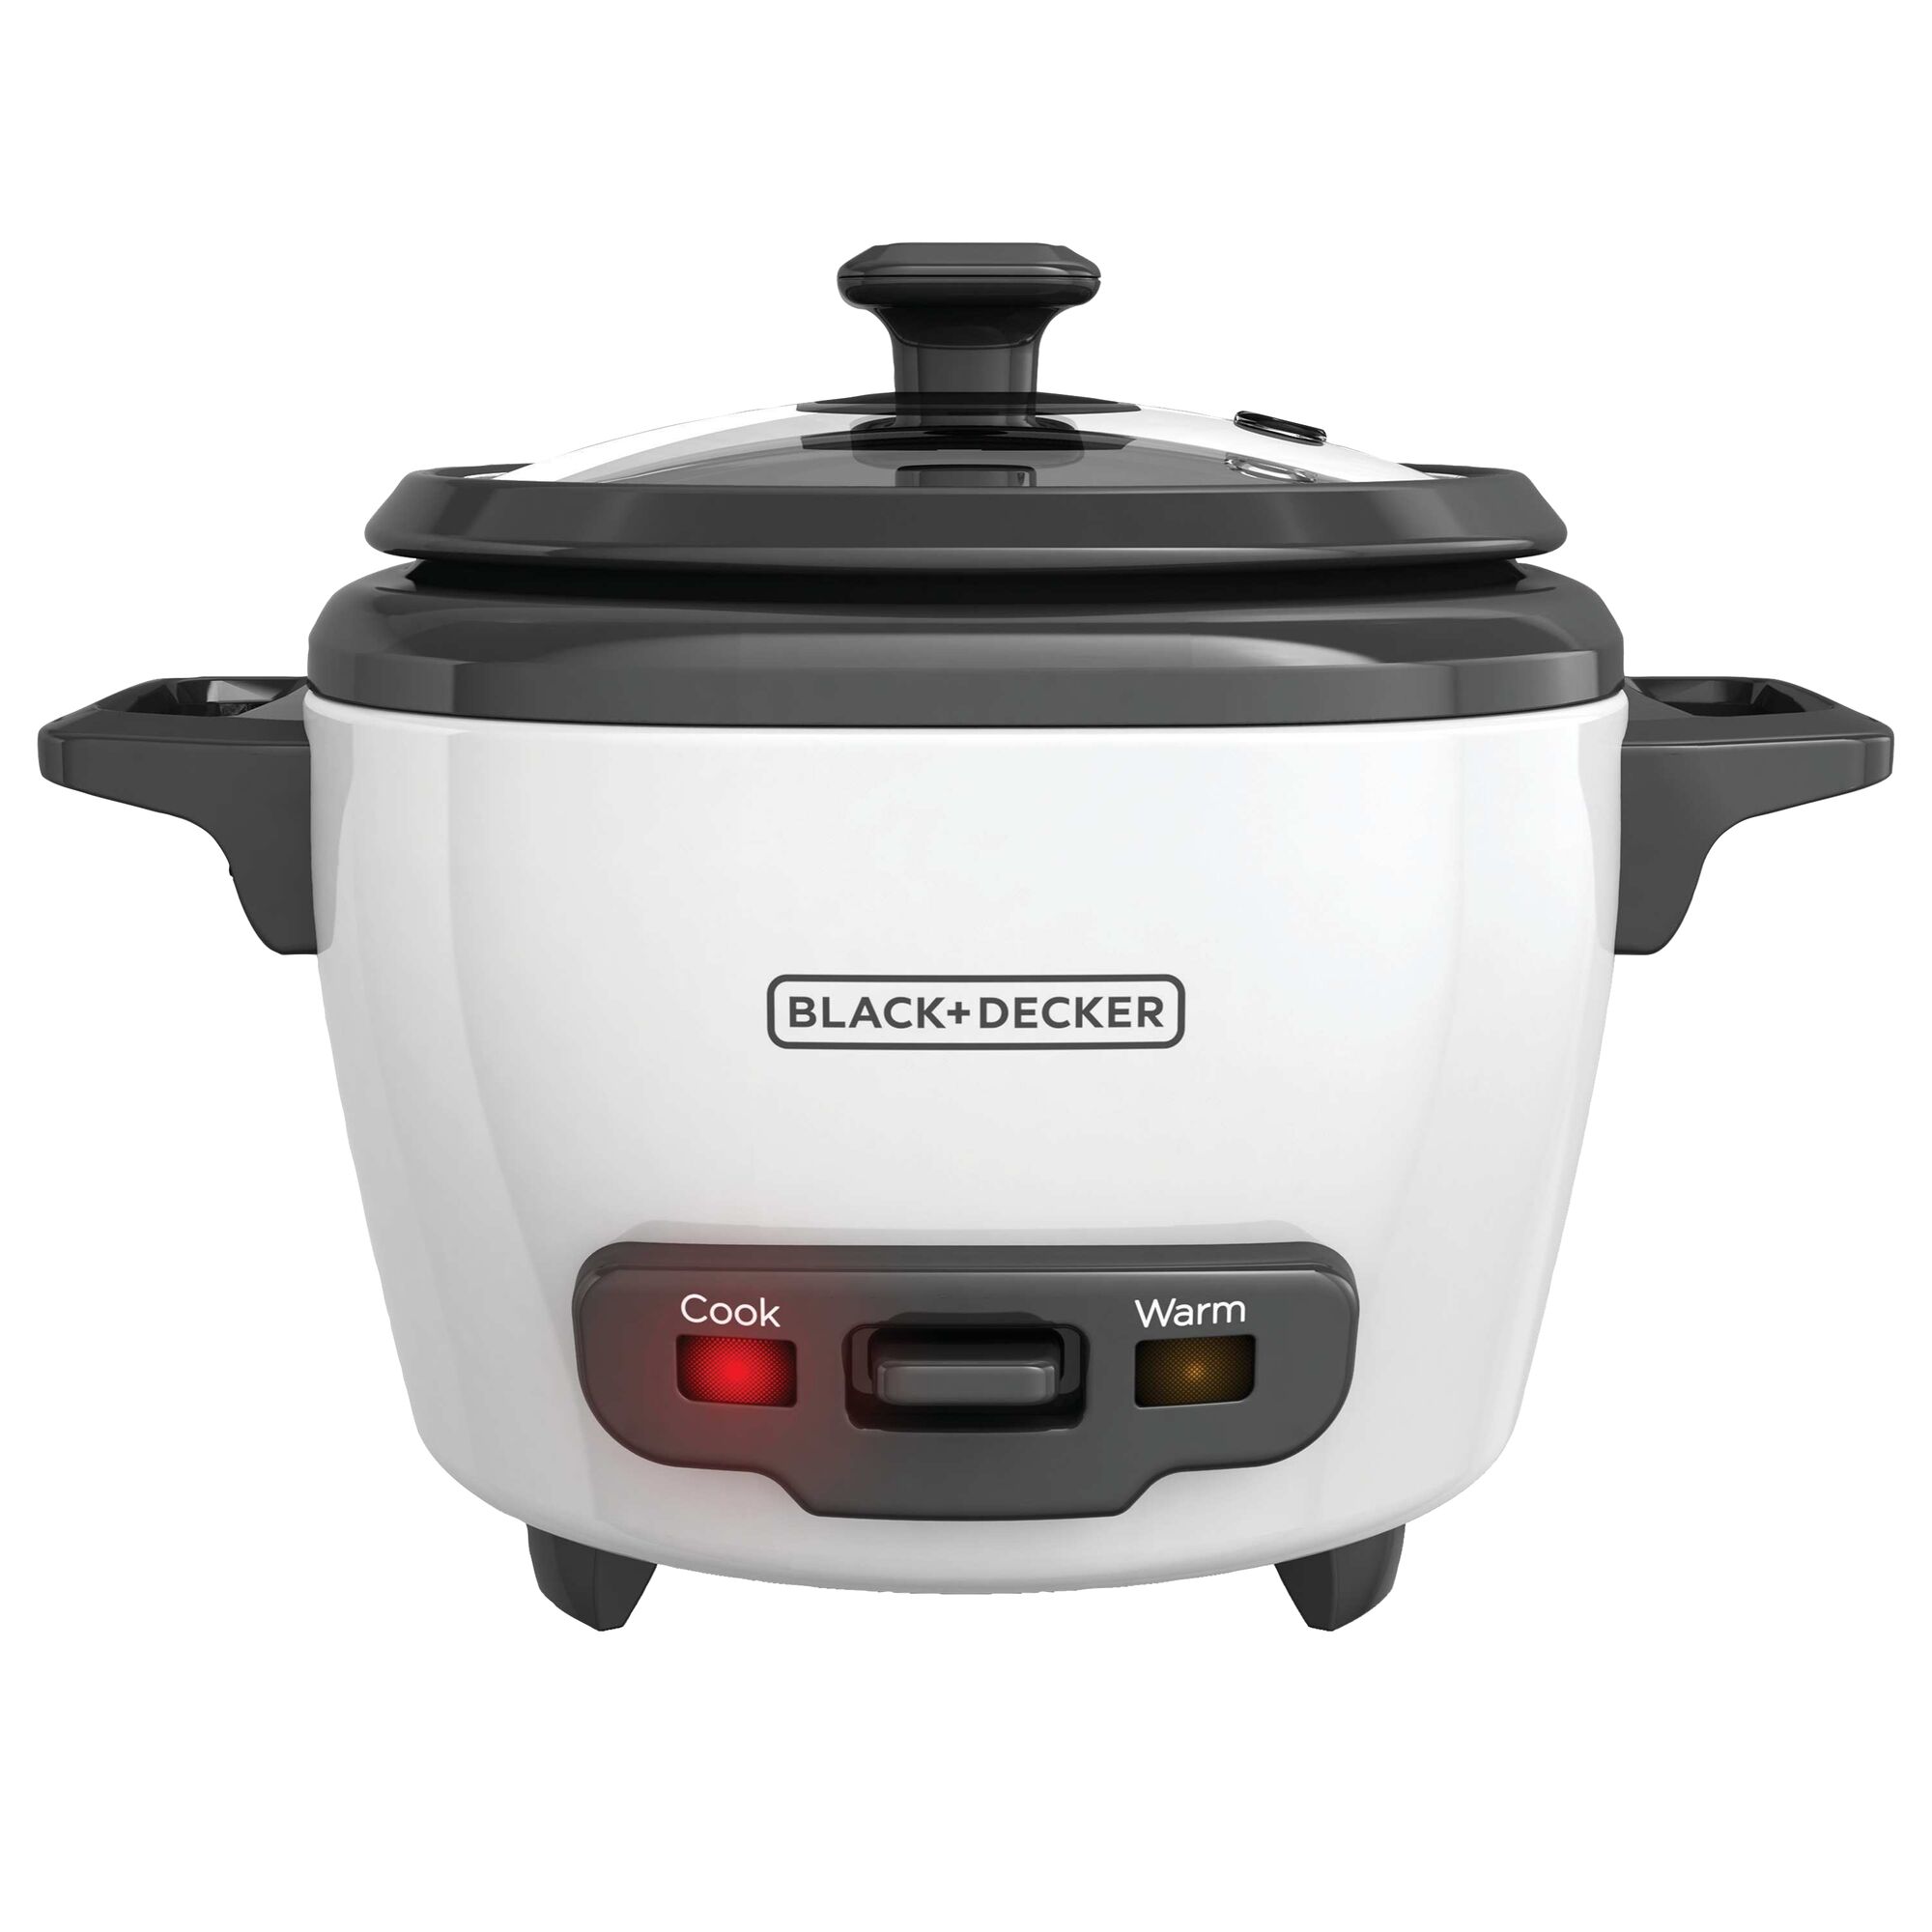 Profile of black plus decker 3 cup electric rice cooker with keep warm function.